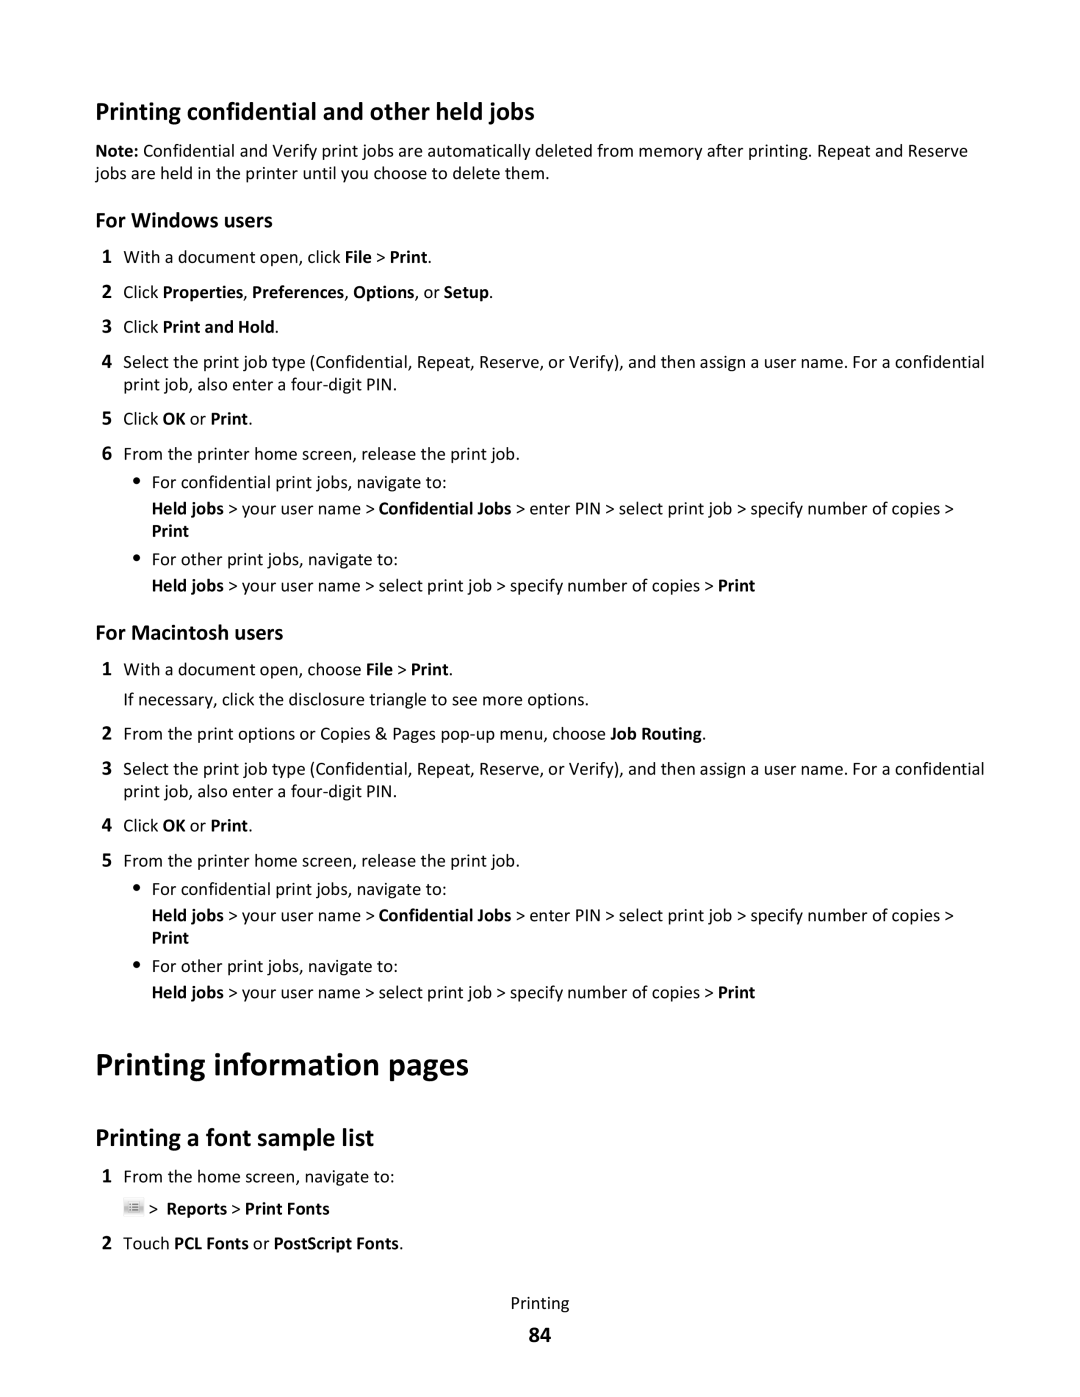 Lexmark C790 manual Printing information pages, Printing confidential and other held jobs, Printing a font sample list 